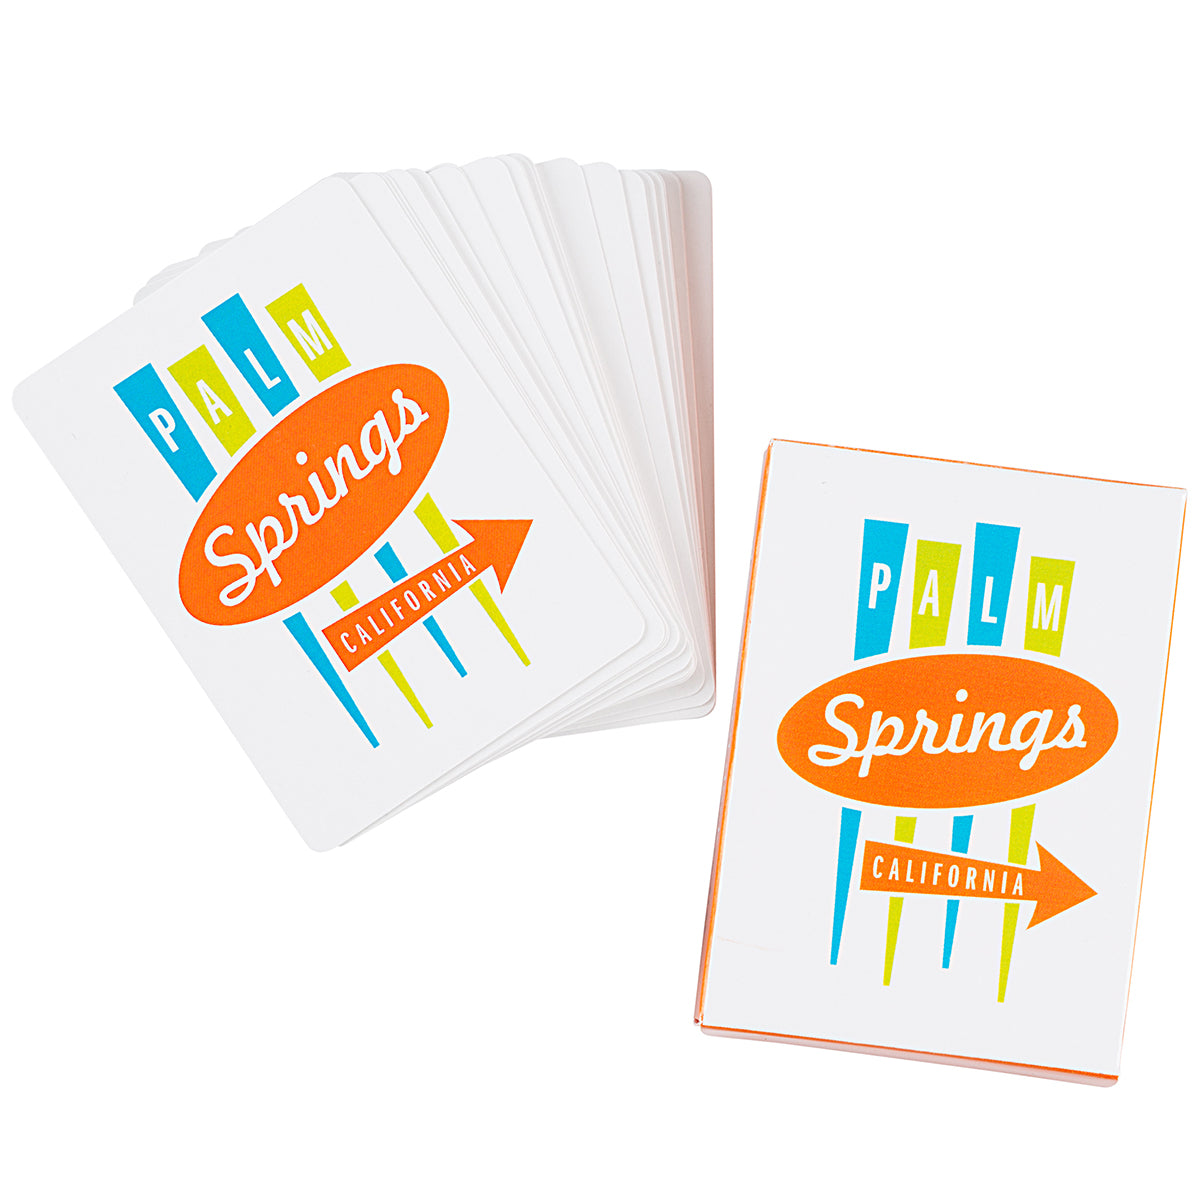 Palm Springs Sign Design Playing Cards